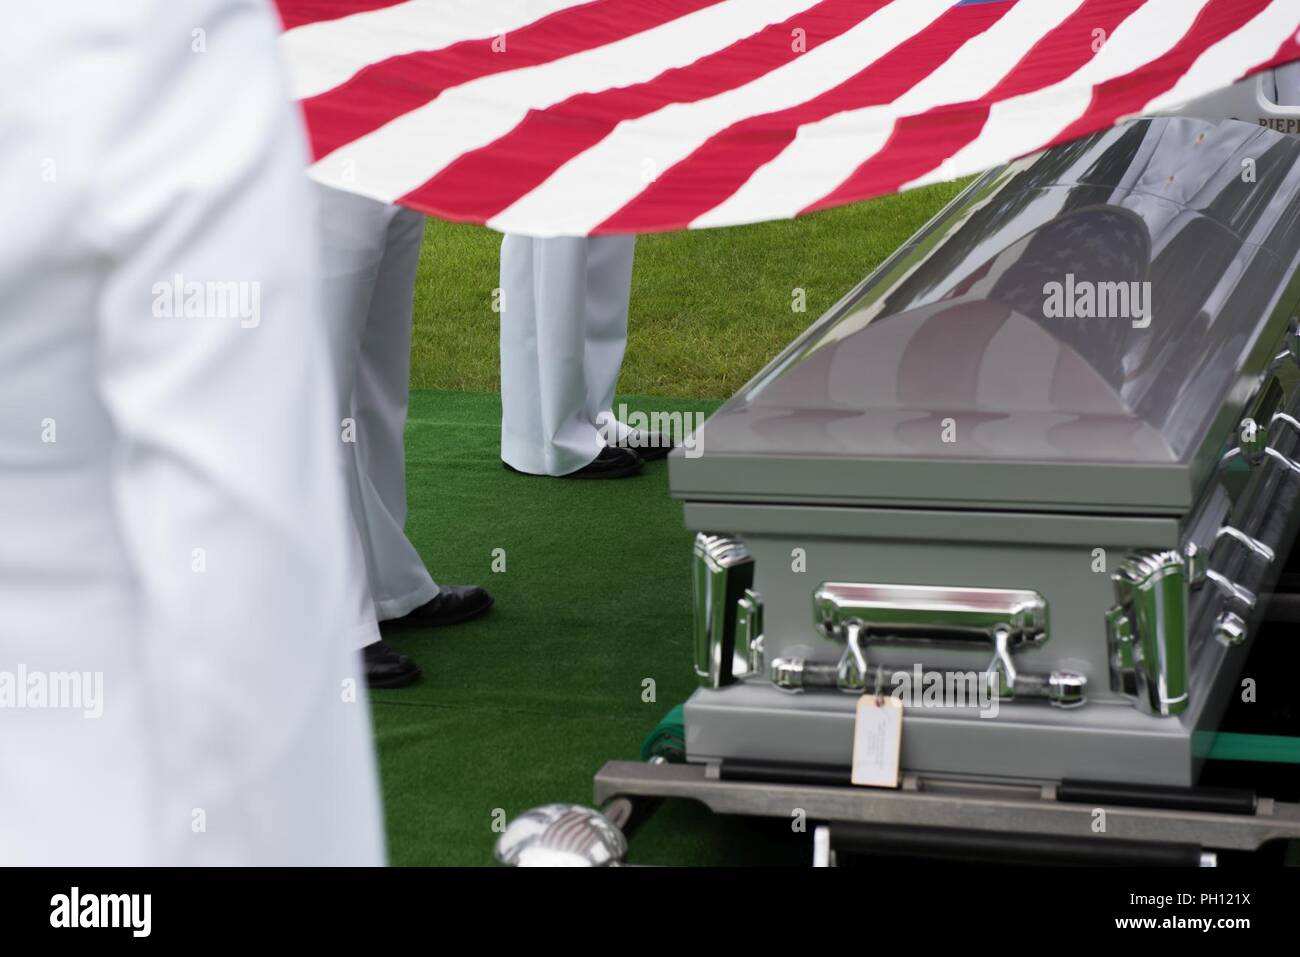 NORMANDY, France (June 19, 2018) The U.S. Naval Hospital Naples honor guard holds the American flag over the remains of Radioman 2nd Class Julius “Henry” Pieper during his funeral service at Normandy American Cemetery. Henry Pieper and his twin brother, Radioman 2nd Class Ludwig “Louie” Pieper, were both killed when their ship, Landing Ship Tank (LST) 523, struck an underwater mine off the coast of France on June 19, 1944. Louie’s remains were found immediately, but Henry’s remains weren’t identified until December 2017. The family requested that Henry be buried in Normandy next to his brother Stock Photo